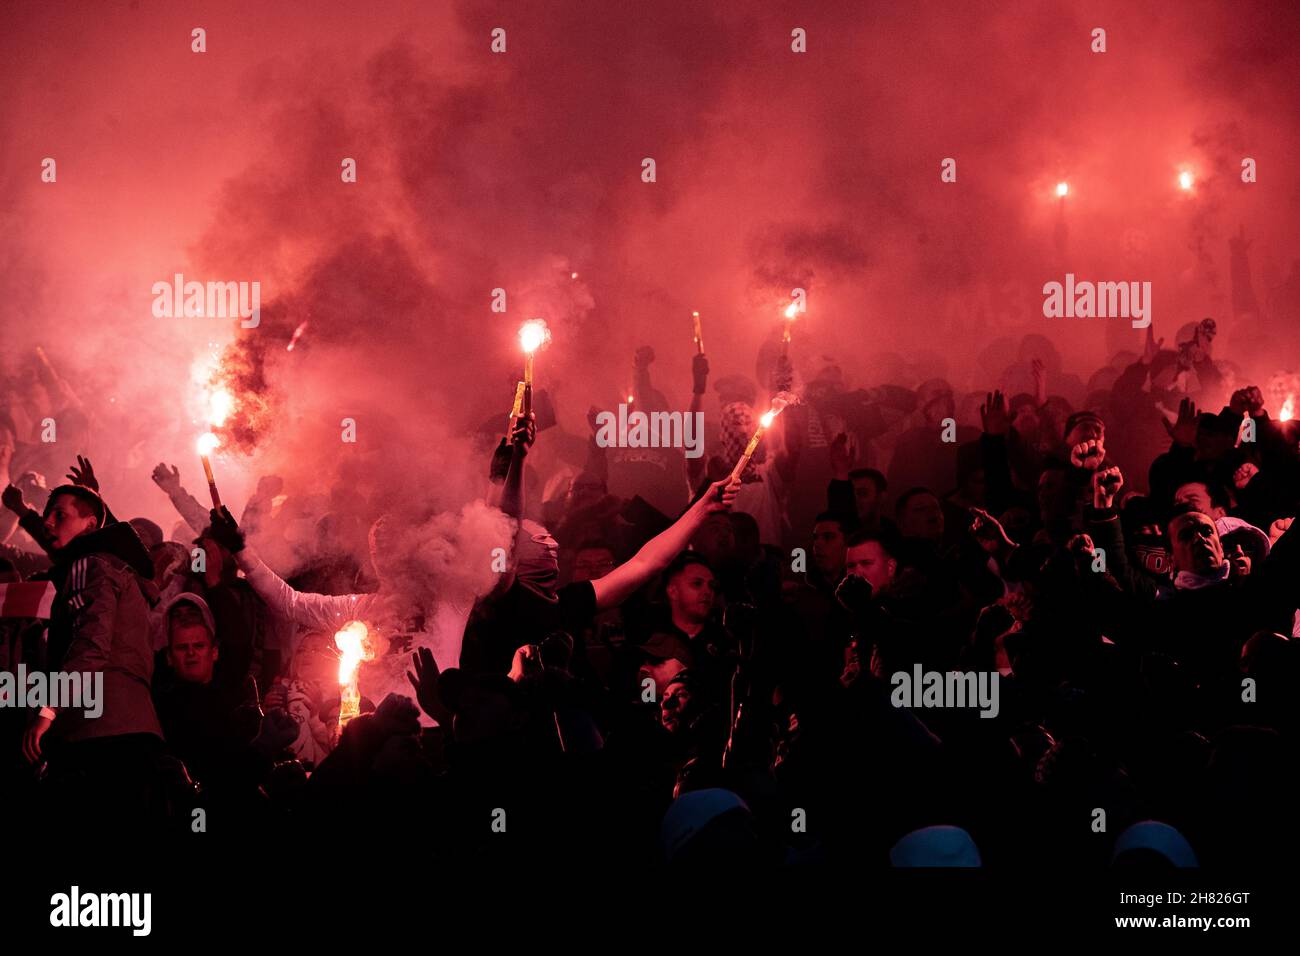 LEICESTER, ENGLAND - NOVEMBER 25: Legia Warszawa ultras fans set up flares during the UEFA Europa League group C match between Leicester City and Legi Stock Photo